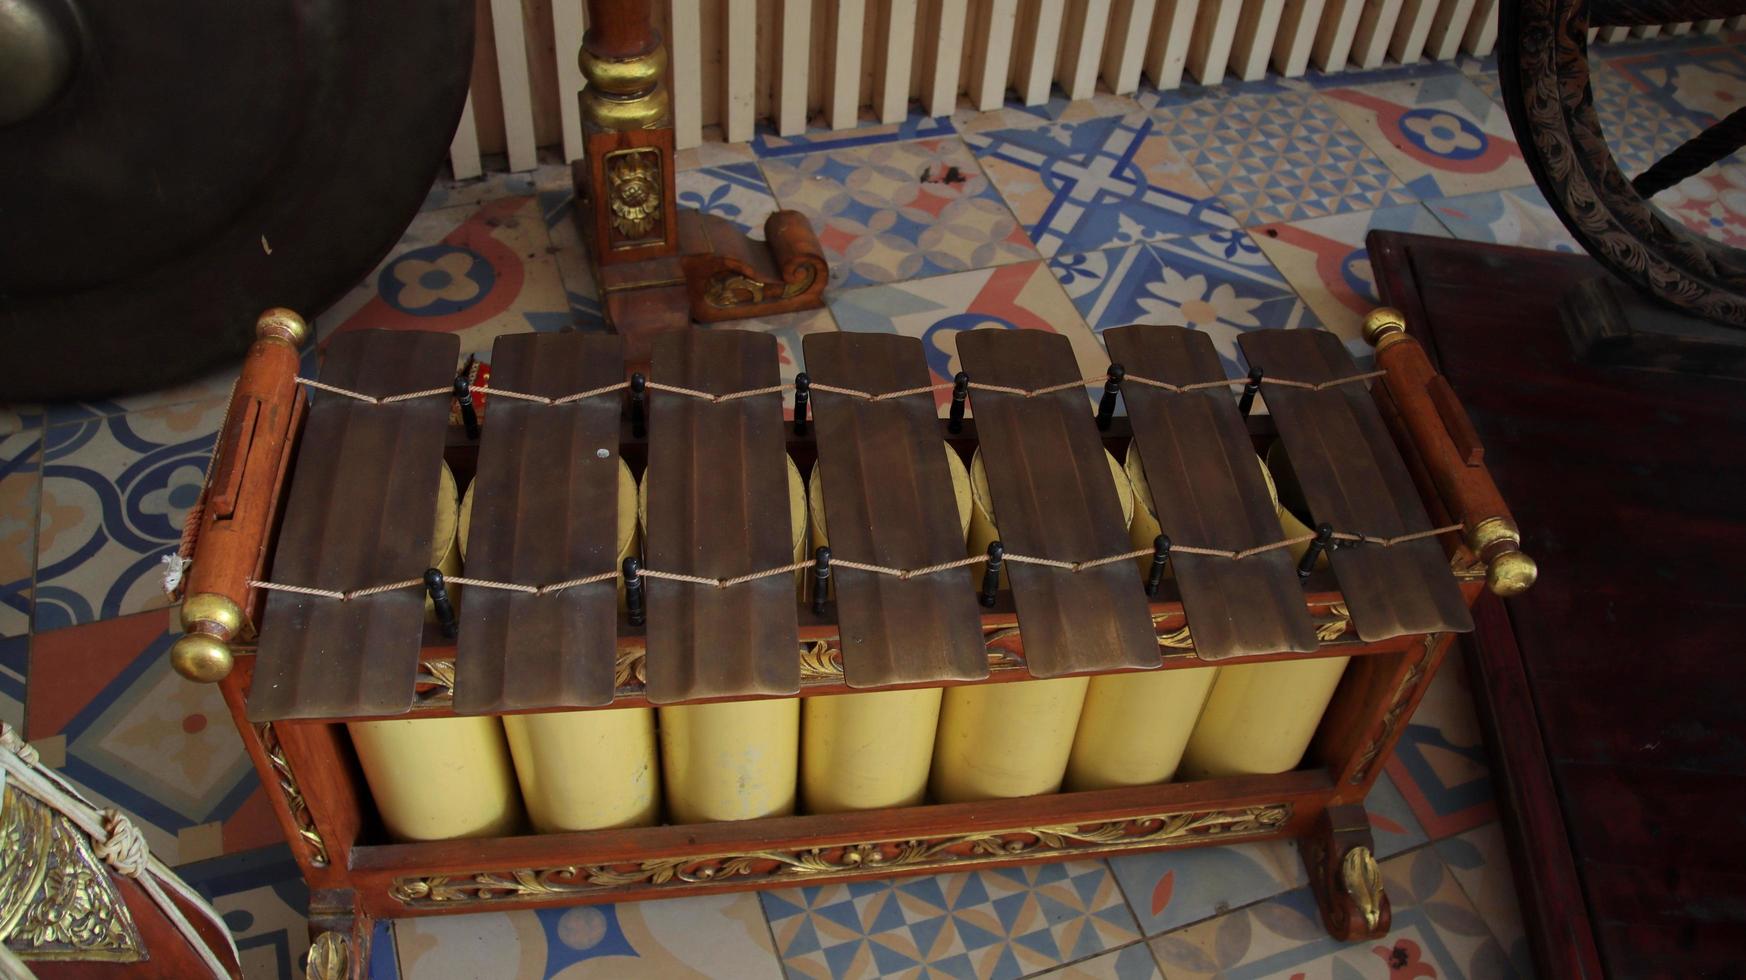 Traditional musical instrument from the Indonesian Javanese. The Gamelan music of Indonesia. A set of Javanese gamelan musical instruments photo